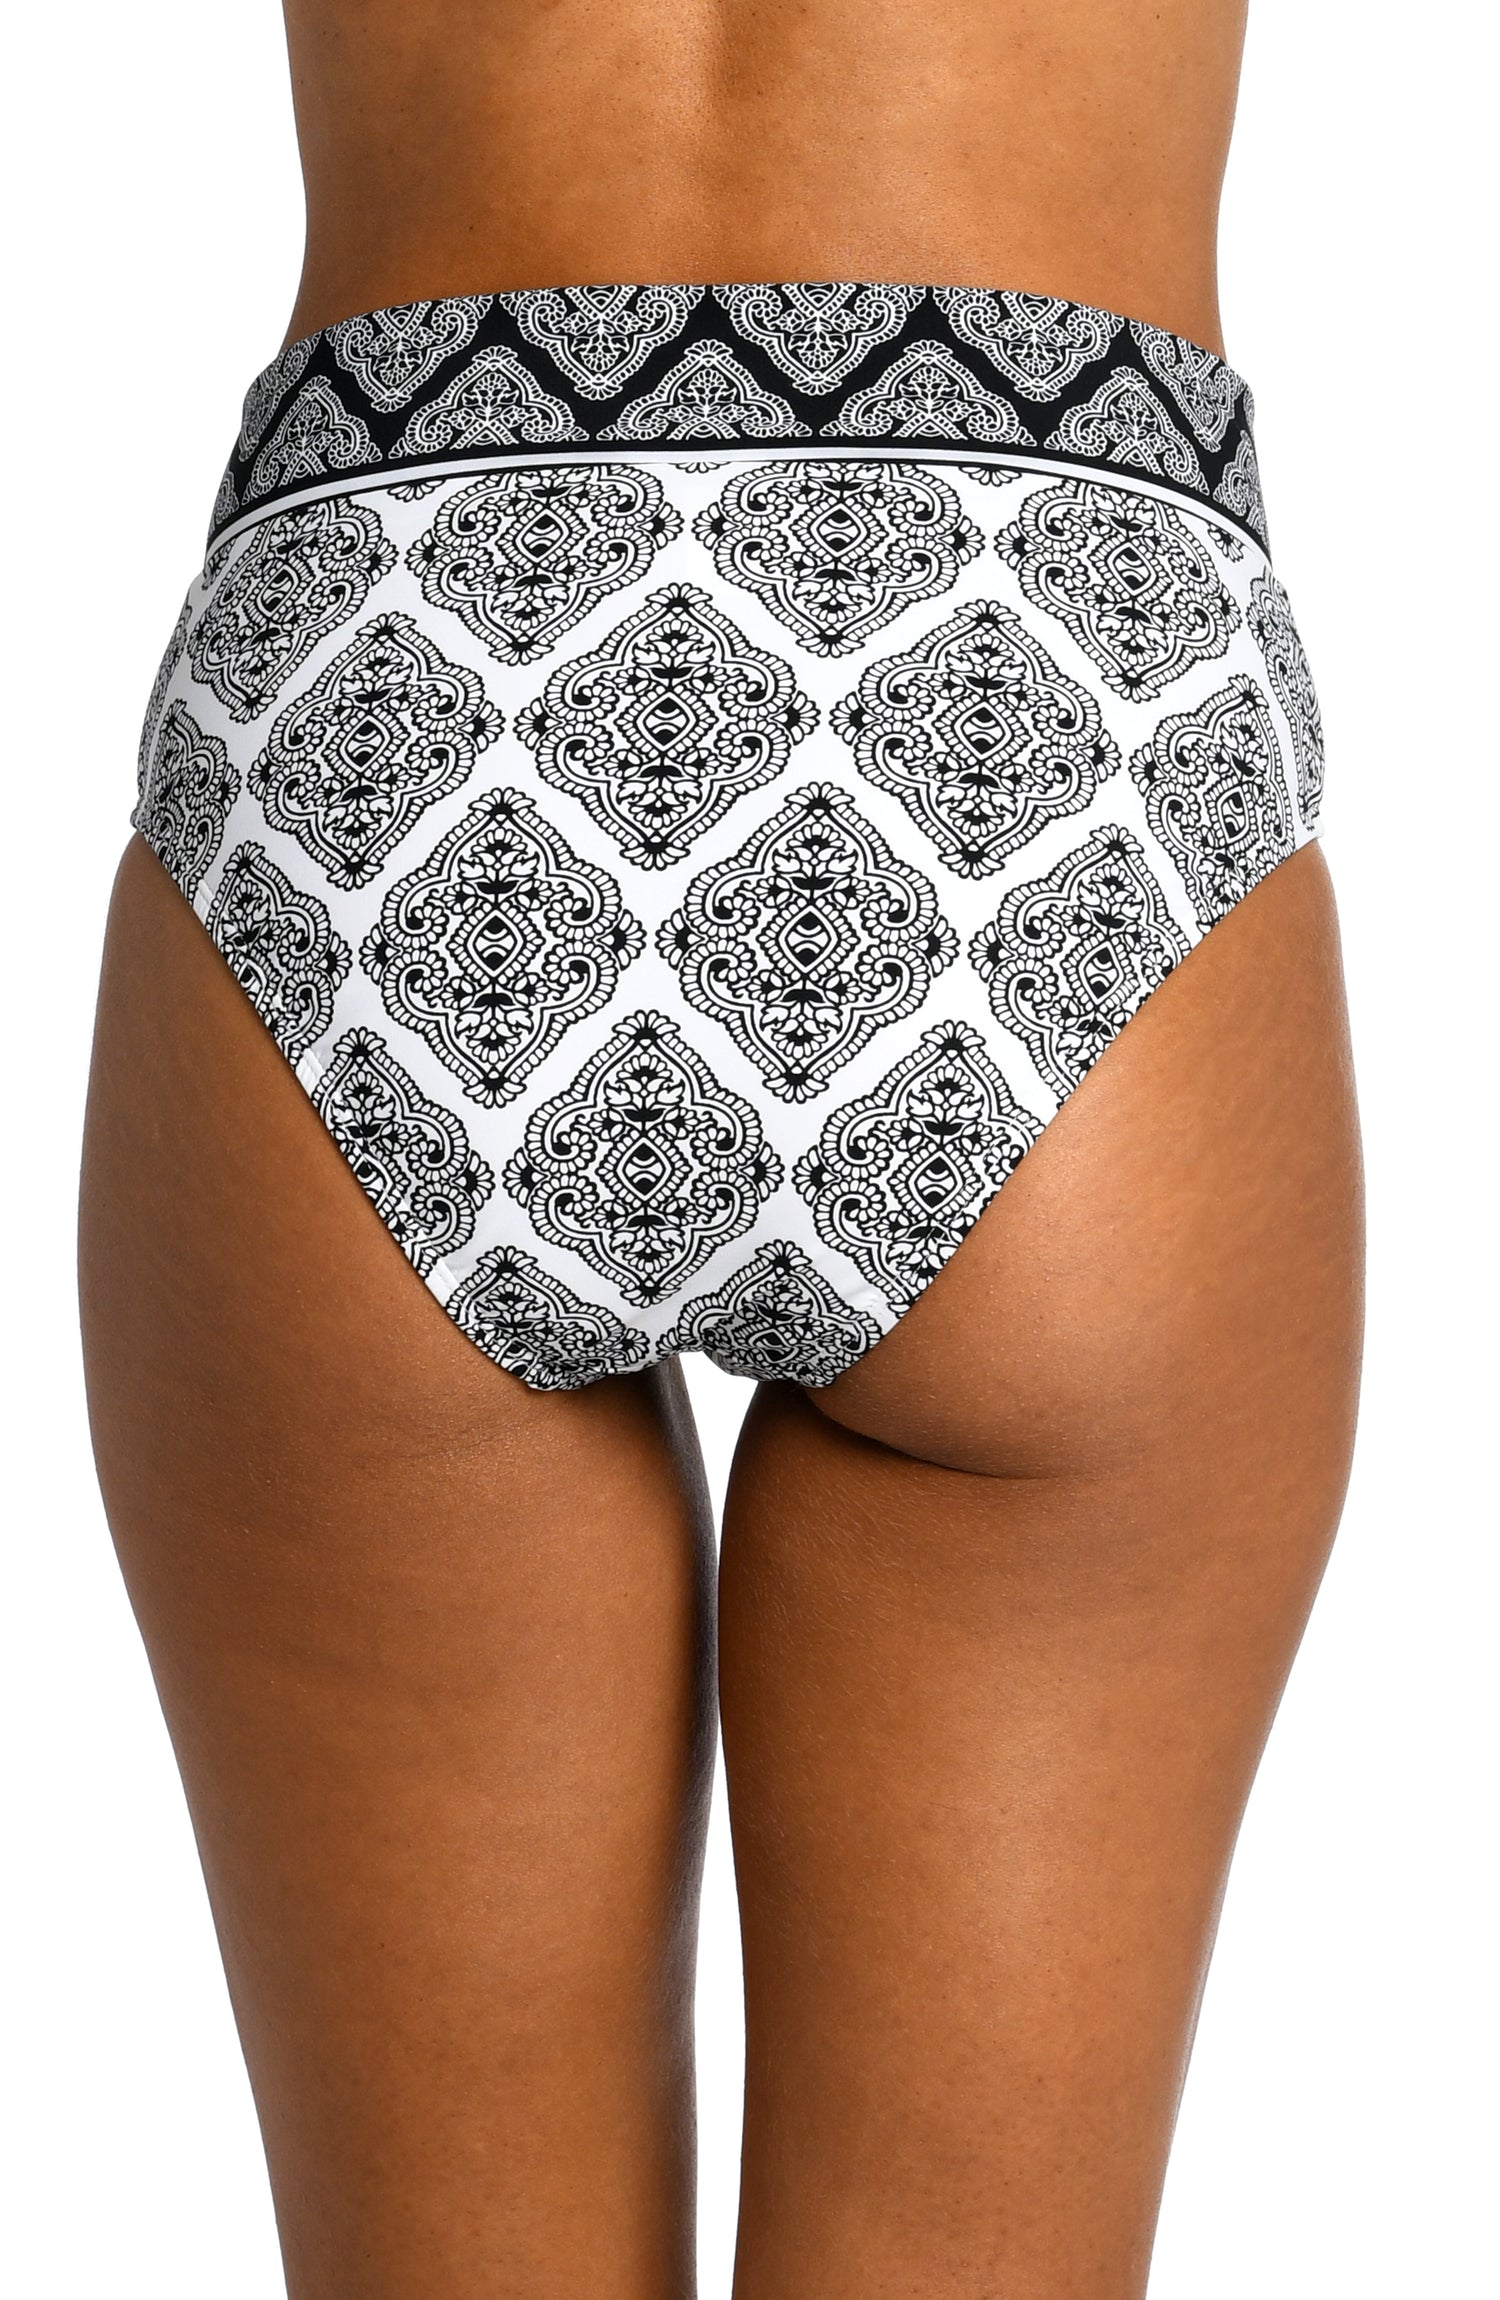 Model is wearing a black and white geometric printed crossover high waist bottom from our Oasis Tile collection!